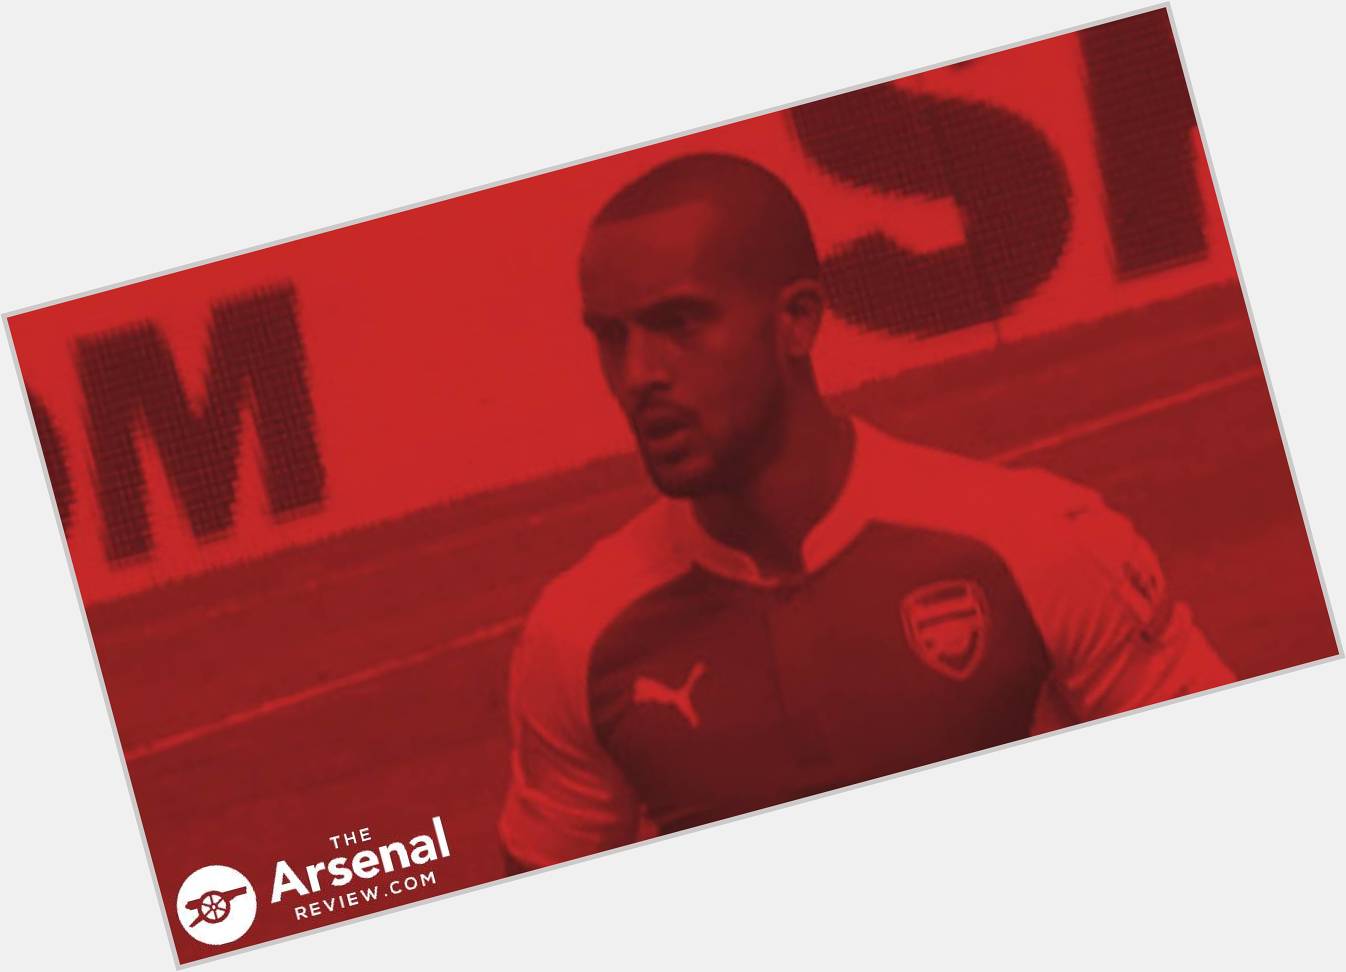 Theo Walcott spent 12 years at Arsenal and scored over 100 goals for the club Happy Birthday, Walcott  